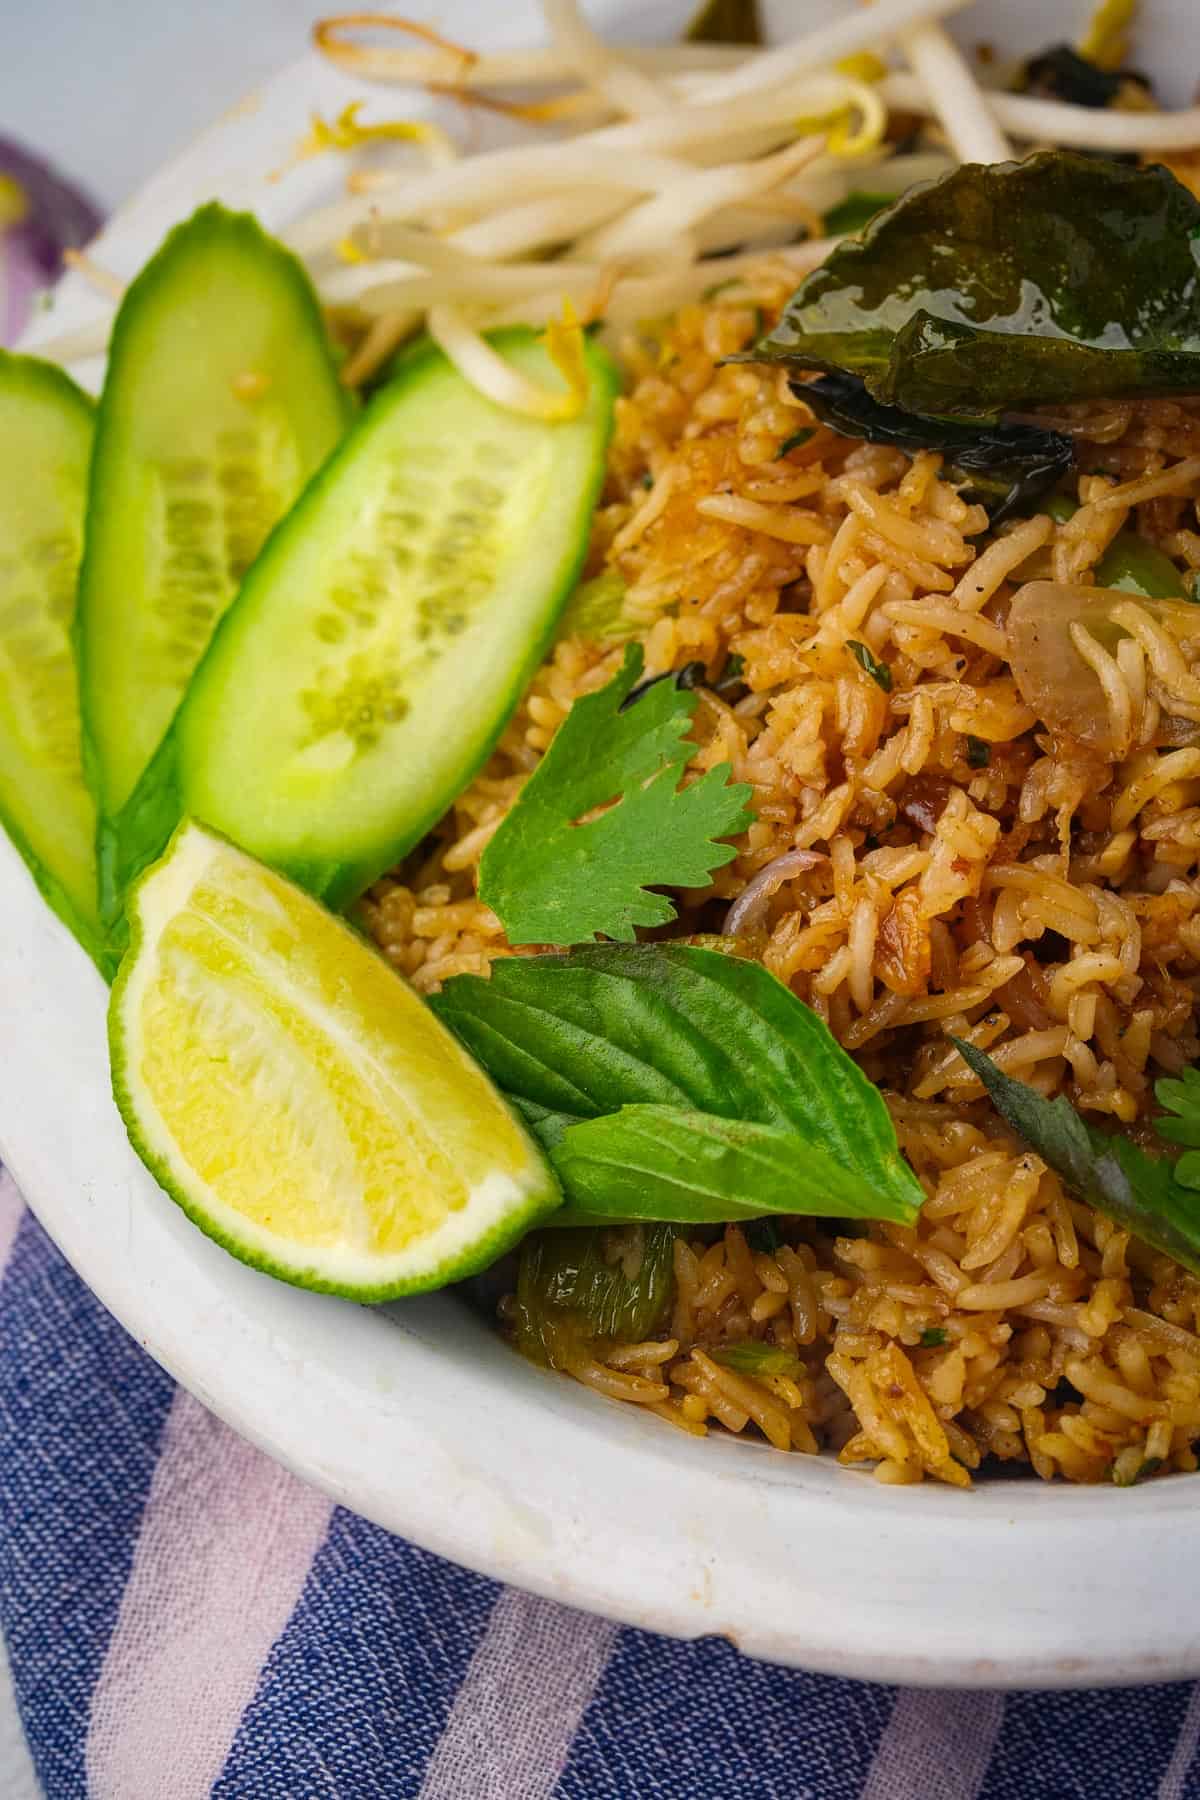 Khao pad fried rice on a plate with cucumbers and limes.